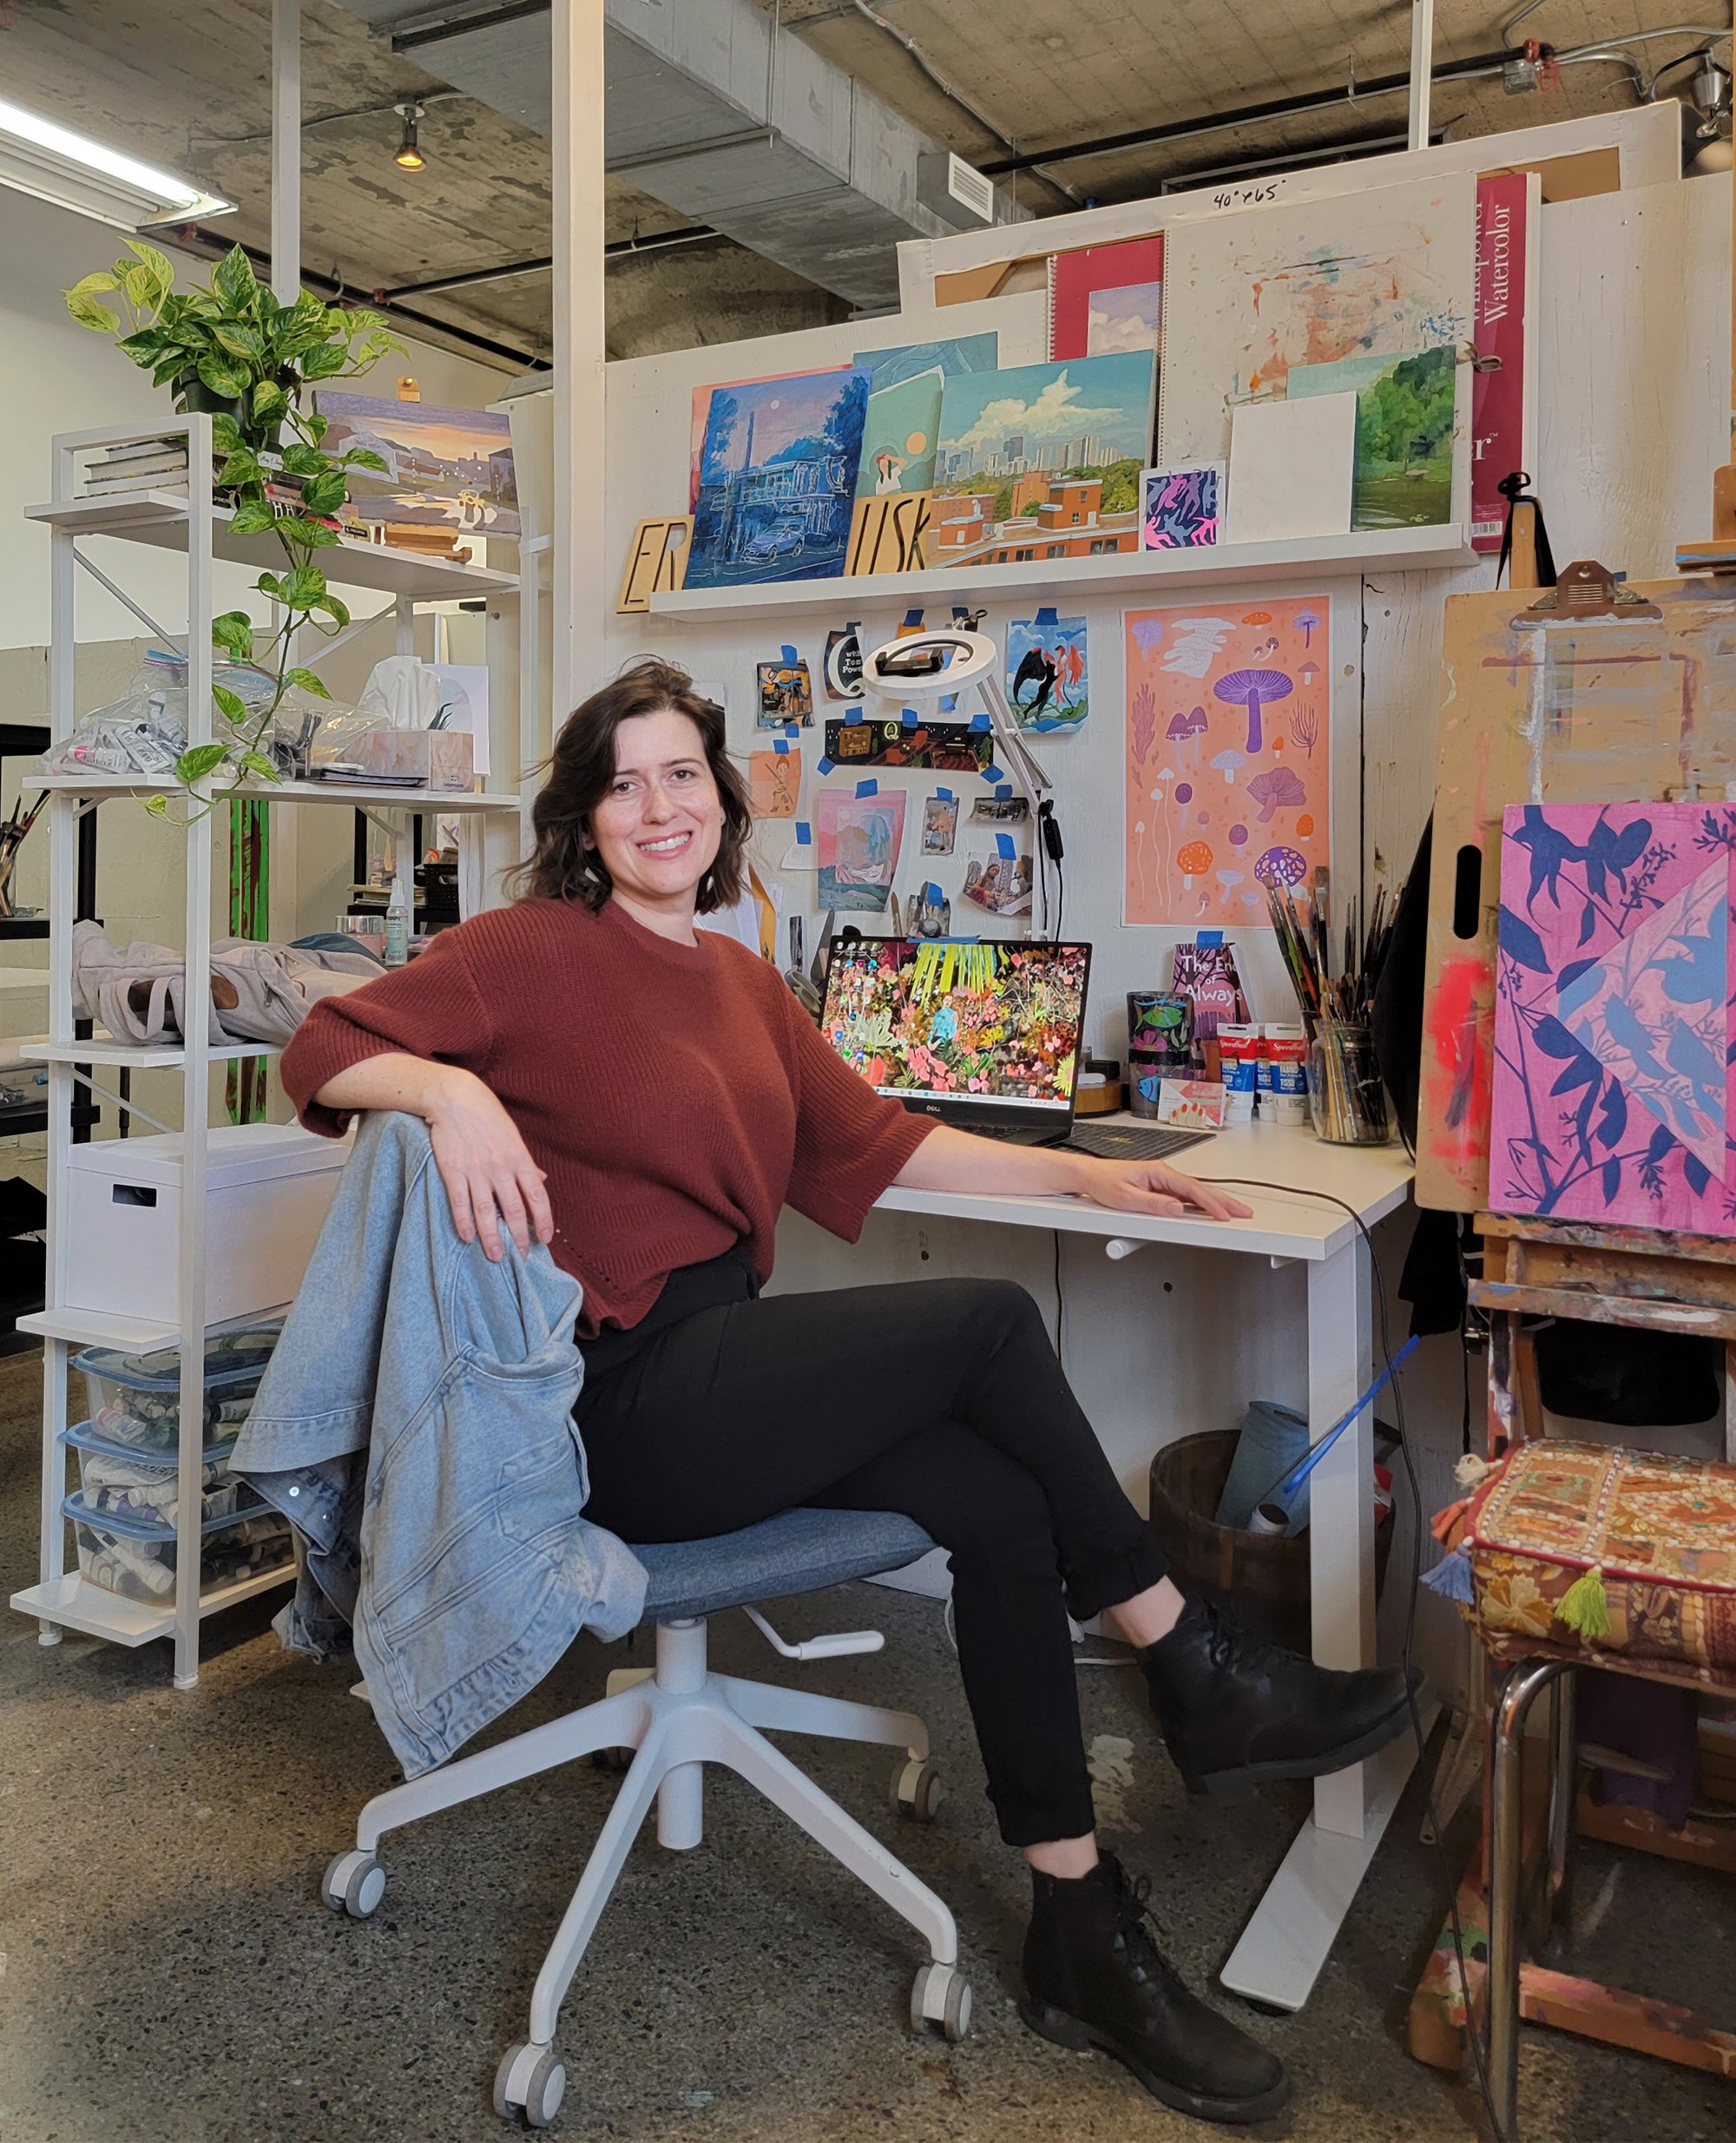   Erin McCluskey sits on an office chair inside her studio. On the desk behind her is her laptop, brushes and paint. Paintings and sketches are taped with blue tape onto the wall behind the desk. Above is a shelf containing more paintings and a green